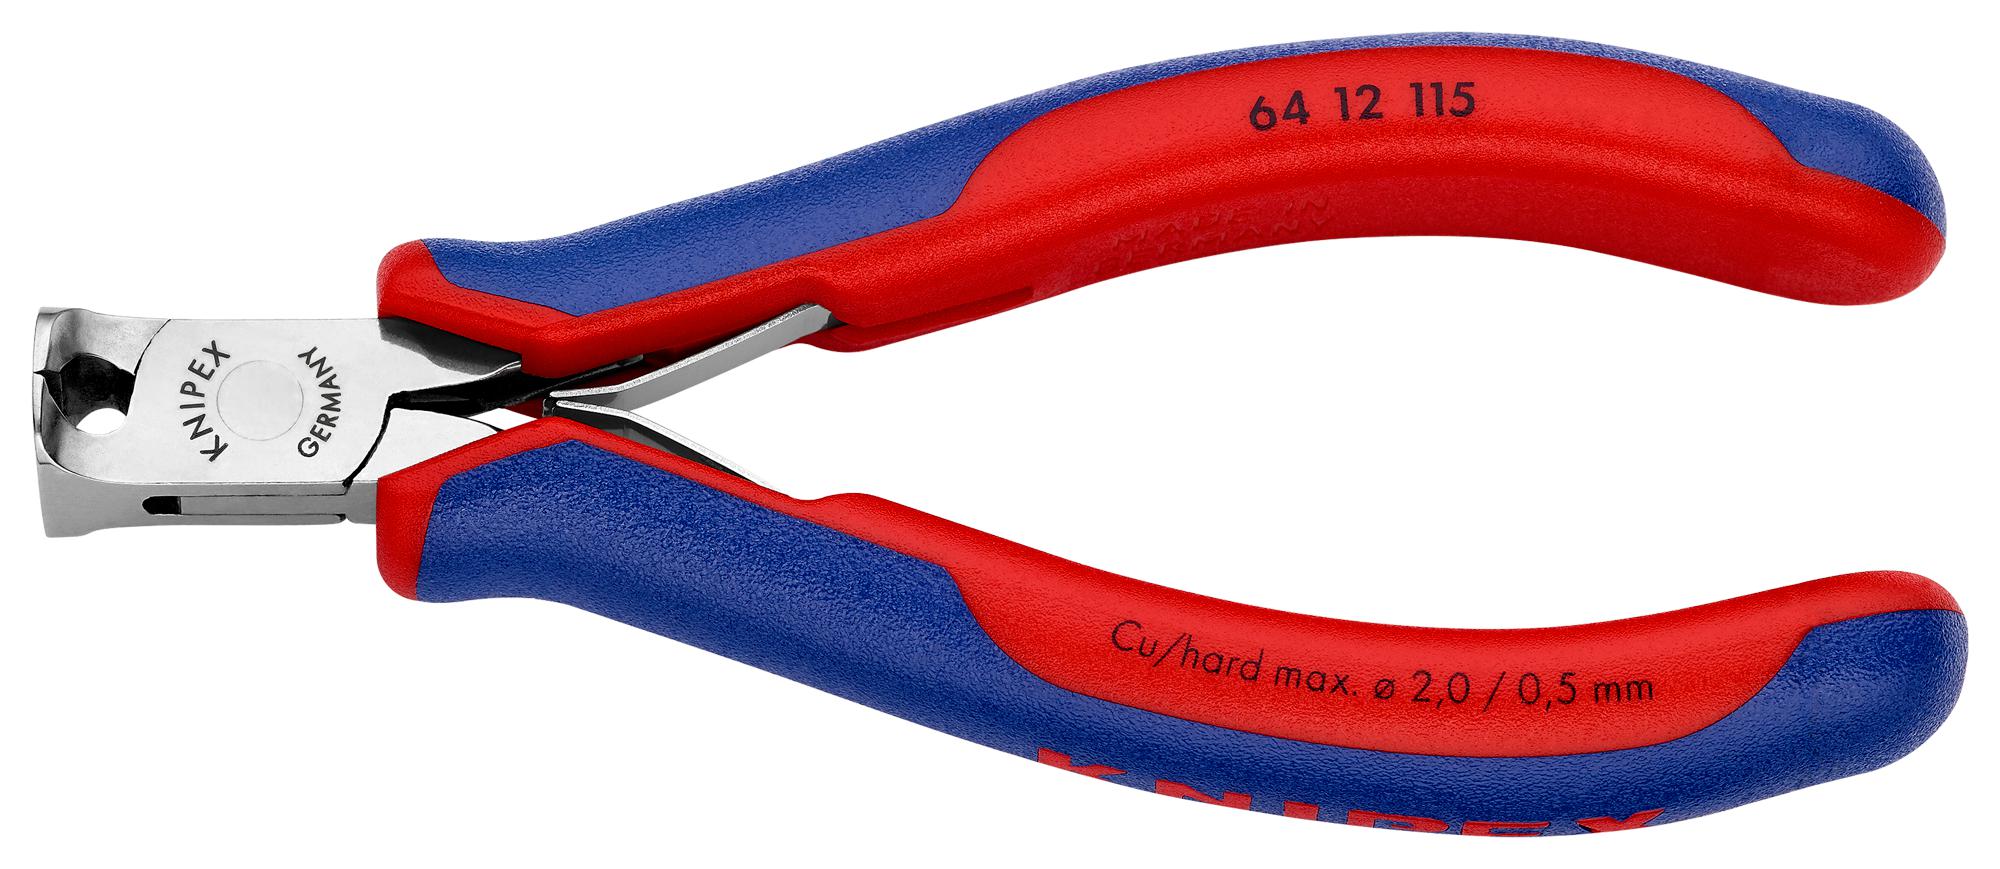 64 12 115 END CUTTING NIPPERS KNIPEX